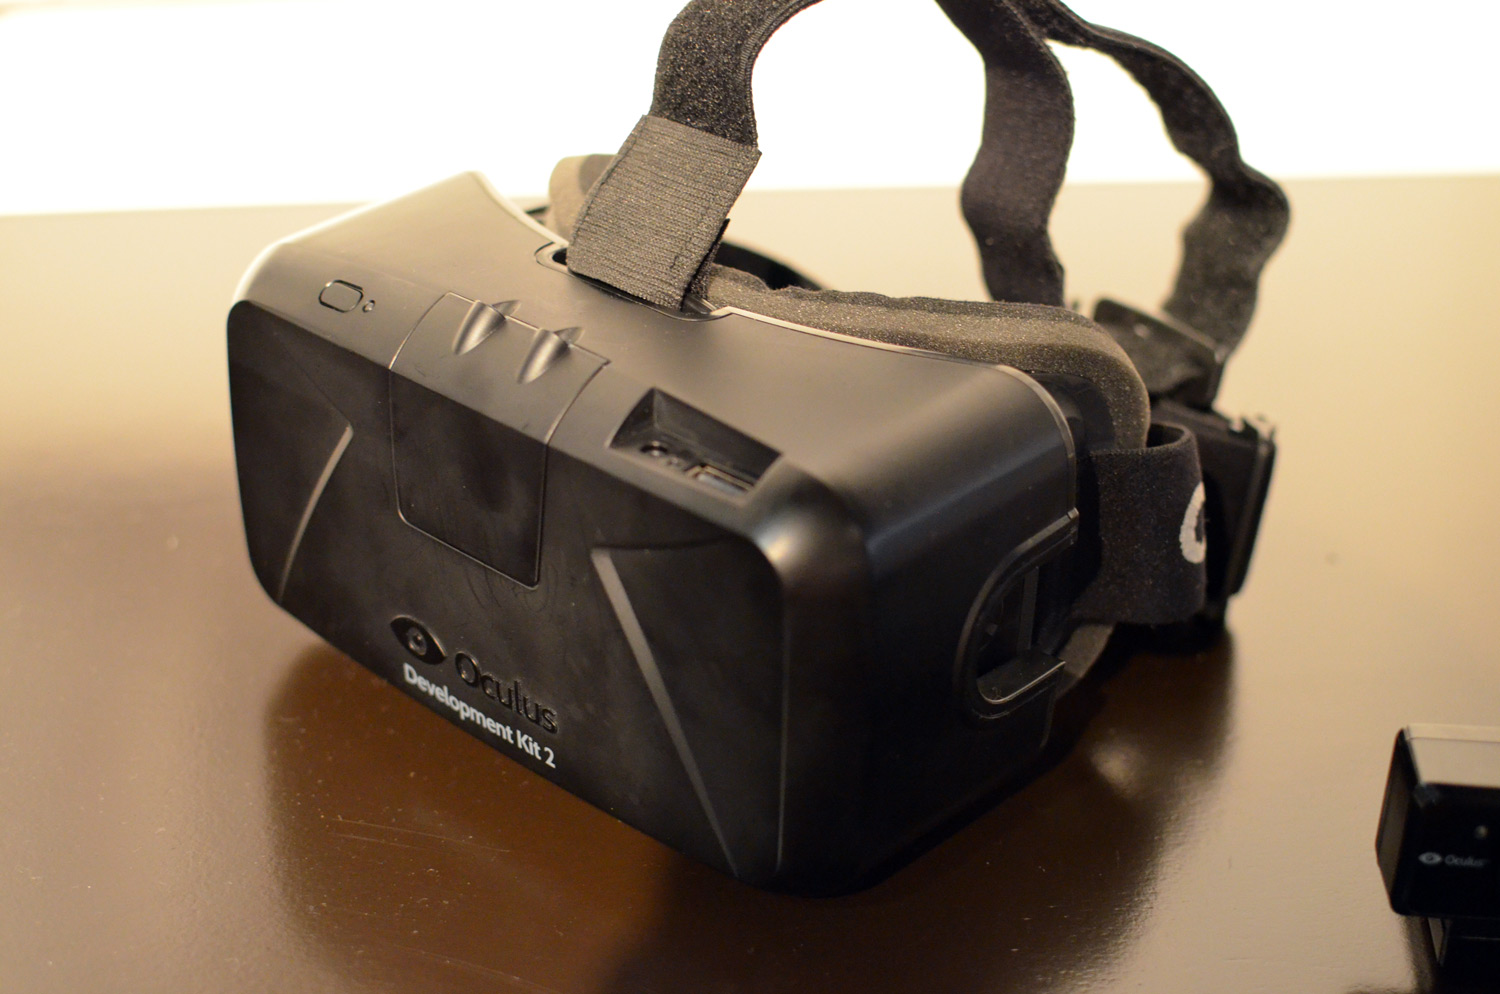 GDC 2014: Oculus Rift Kit 2 Release Date and Pre-order